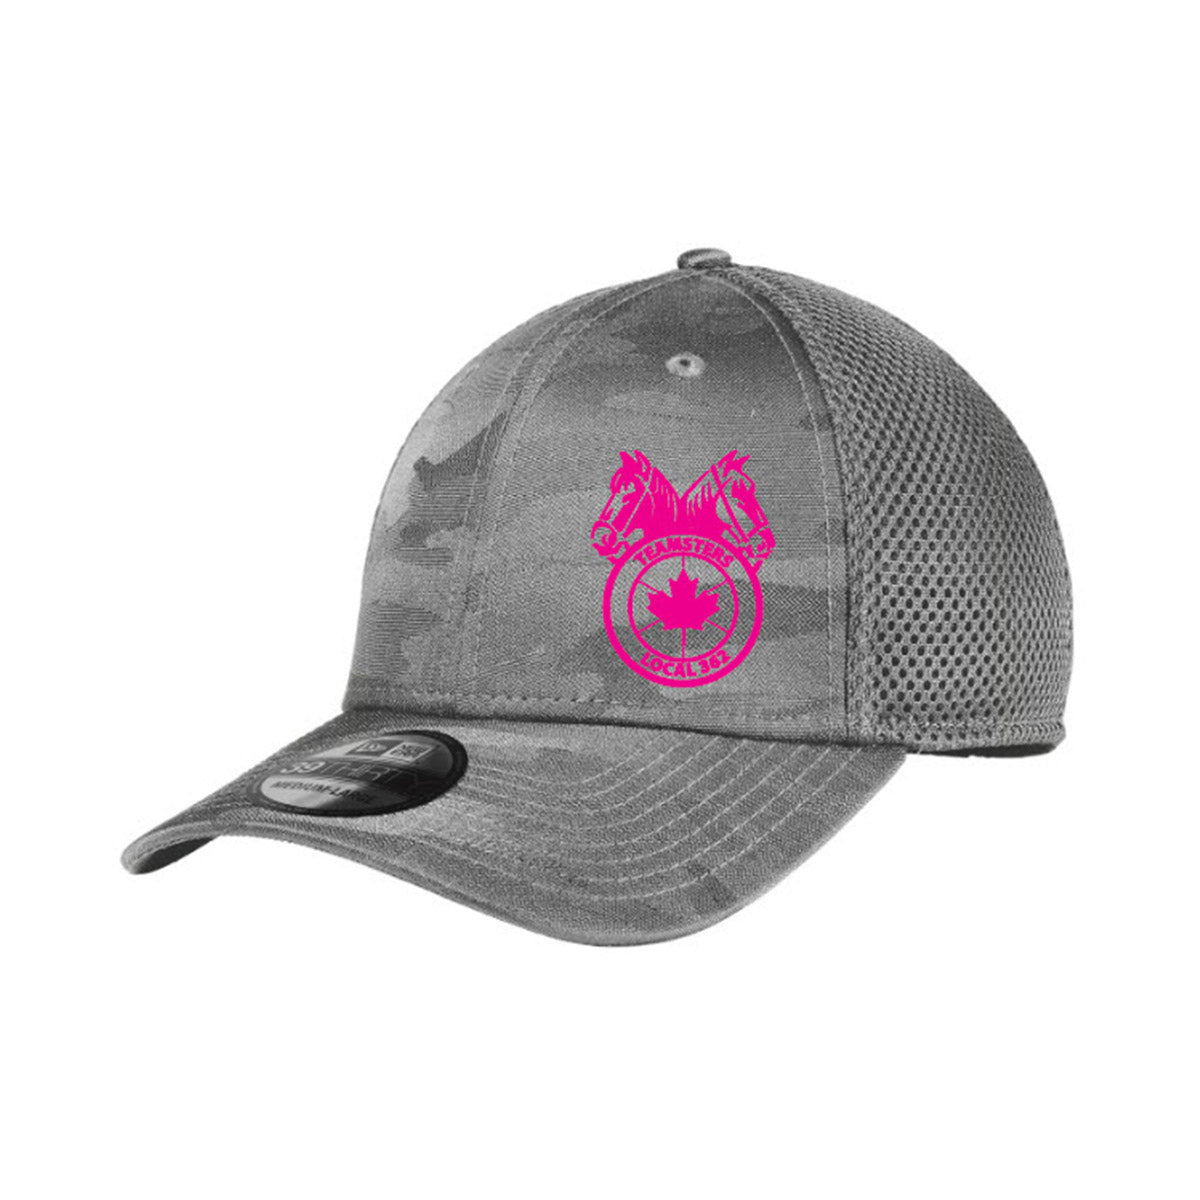 Teamsters 362 - Tonal Camo Cap - NEON PINK Embroidery